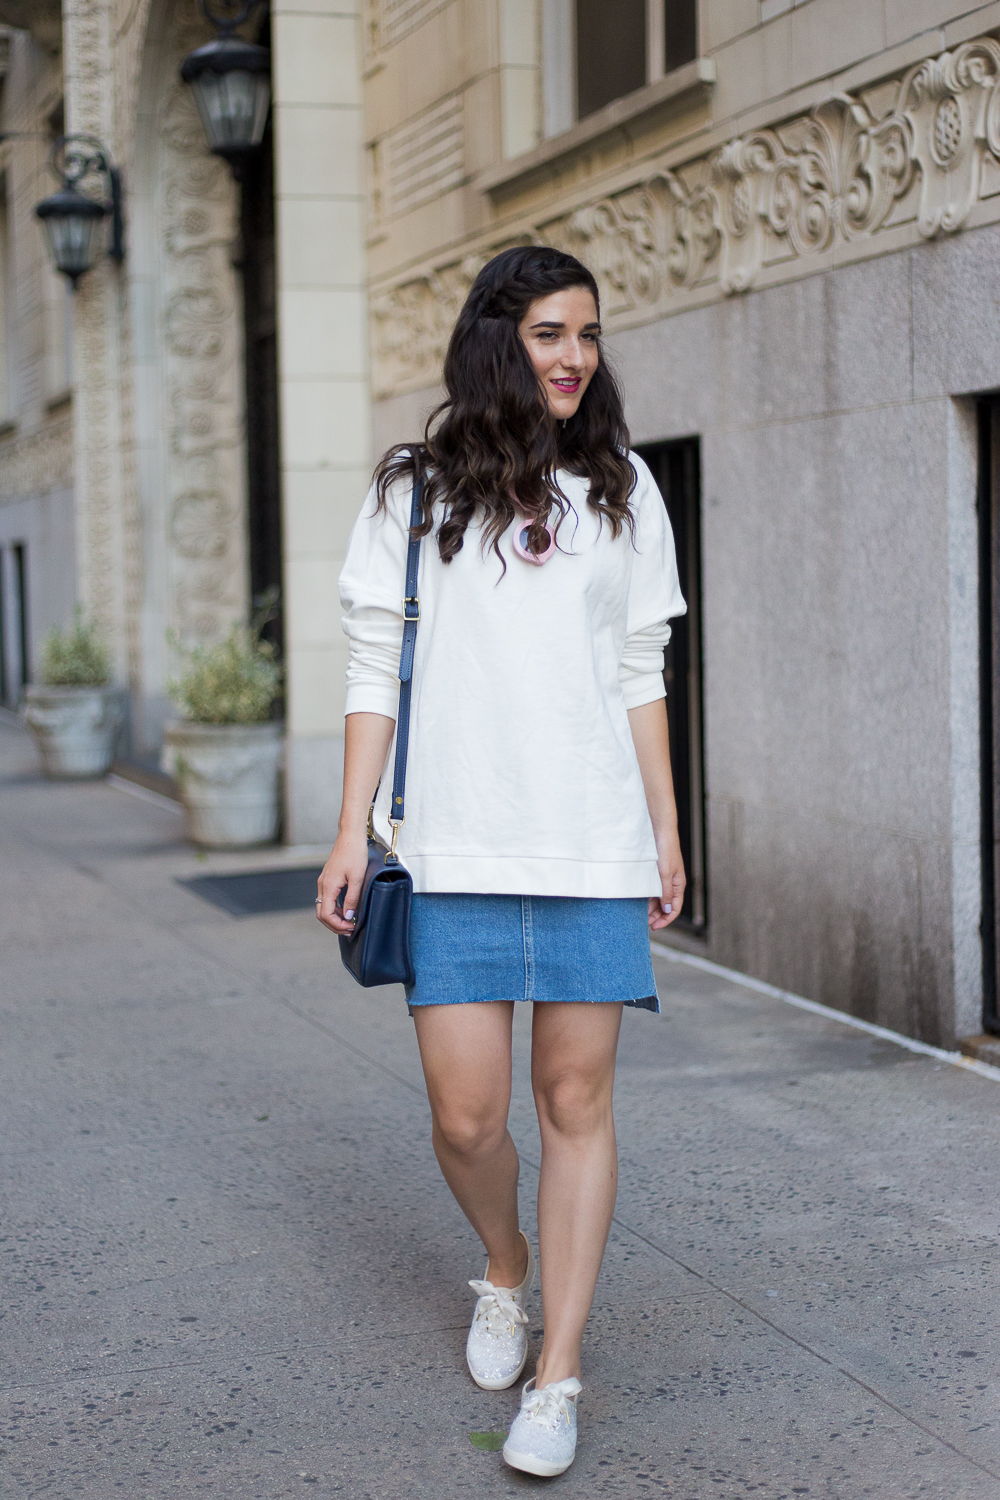 keds white shoes outfit